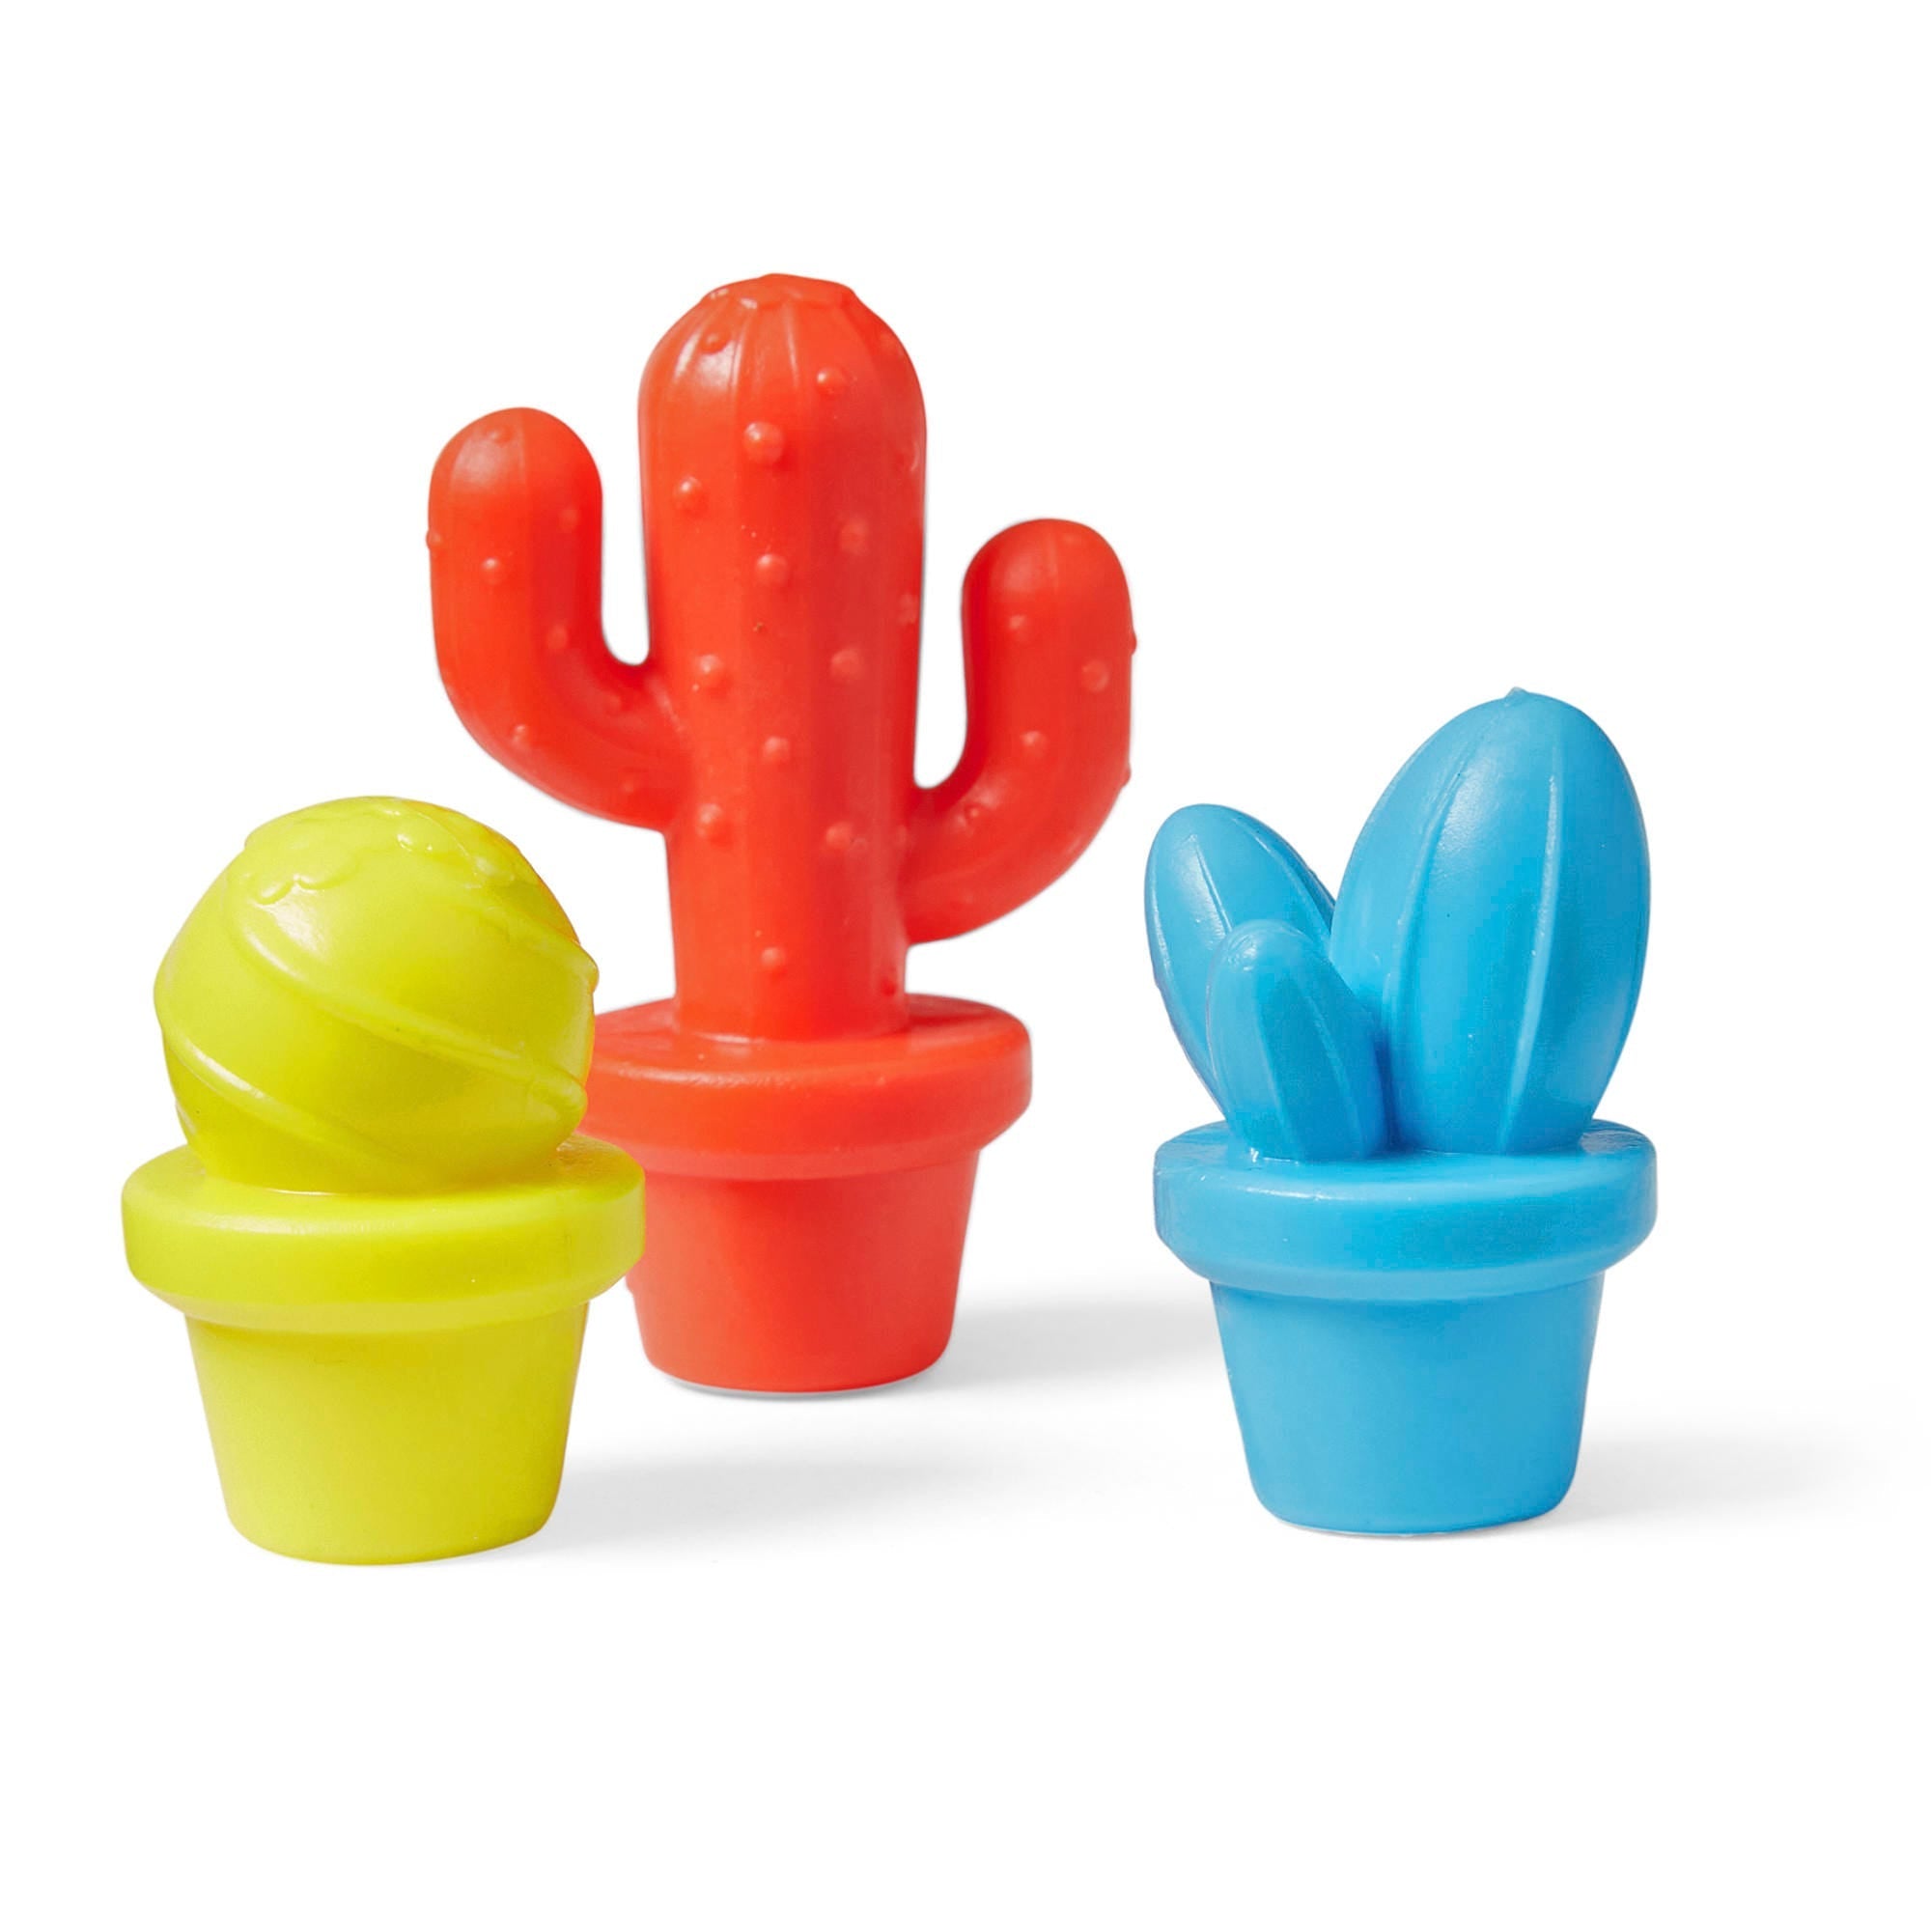 Colourful Cactus Counters, Use this set of 72 Colourful Cactus Counters for a variety of early years maths activities including counting, grouping, patterning, sorting, adding, subtracting, and more. The Colourful Cactus Counters come in 6 unique shapes and 6 unique colours, and are ideal for the classroom. Count, pattern, sort, group, add, subract, and more with this set of colourful cactus counting toys that are perfect for the classroom. Colourful Cactus Counters This set of tactile cactus toys adds and 